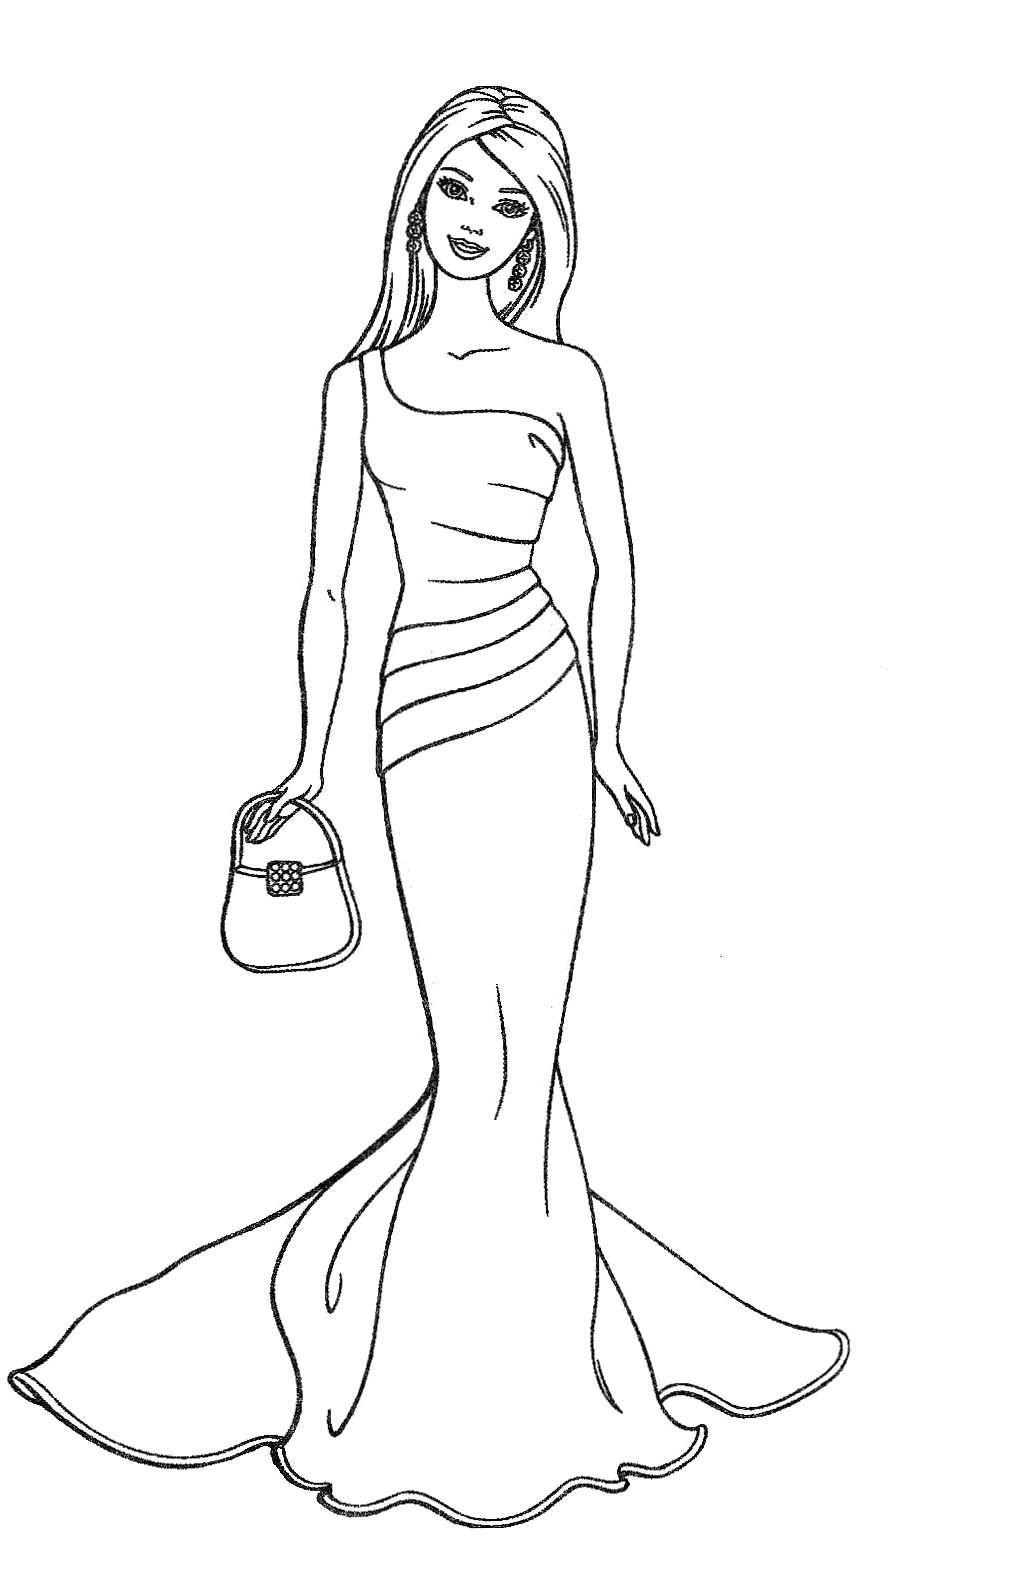 Coloring Pages For Kids Barbie
 barbie fashion coloring page 01